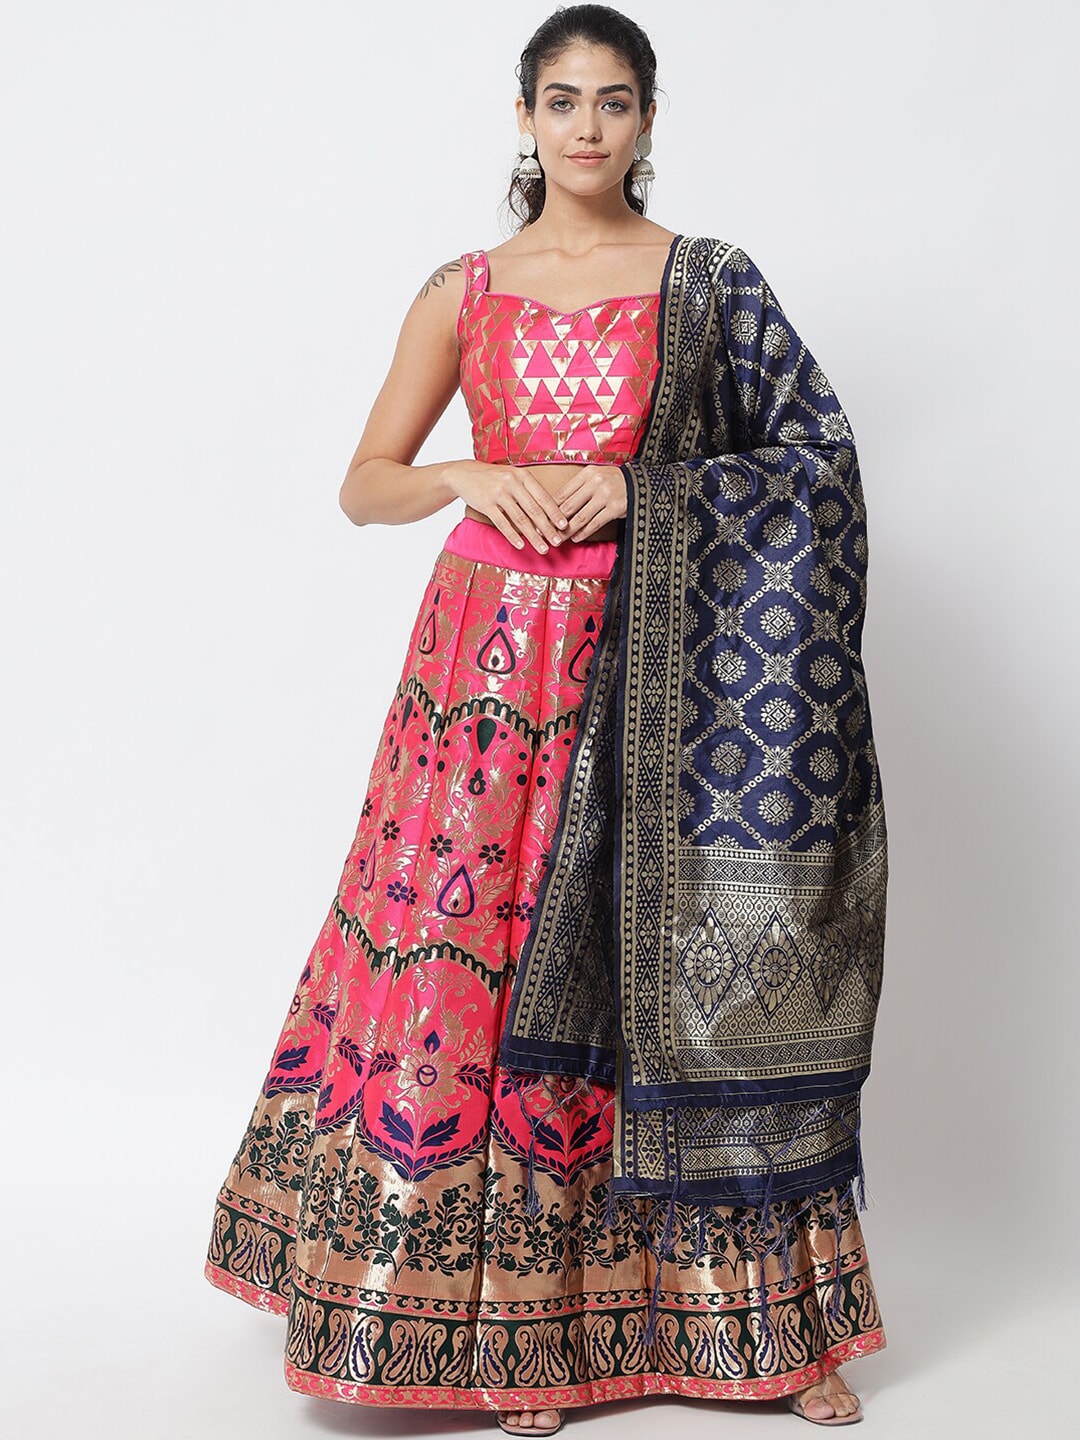 DIVASTRI Pink & Navy Blue Foil Print Semi-Stitched Lehenga & Unstitched Blouse With Dupatta Price in India